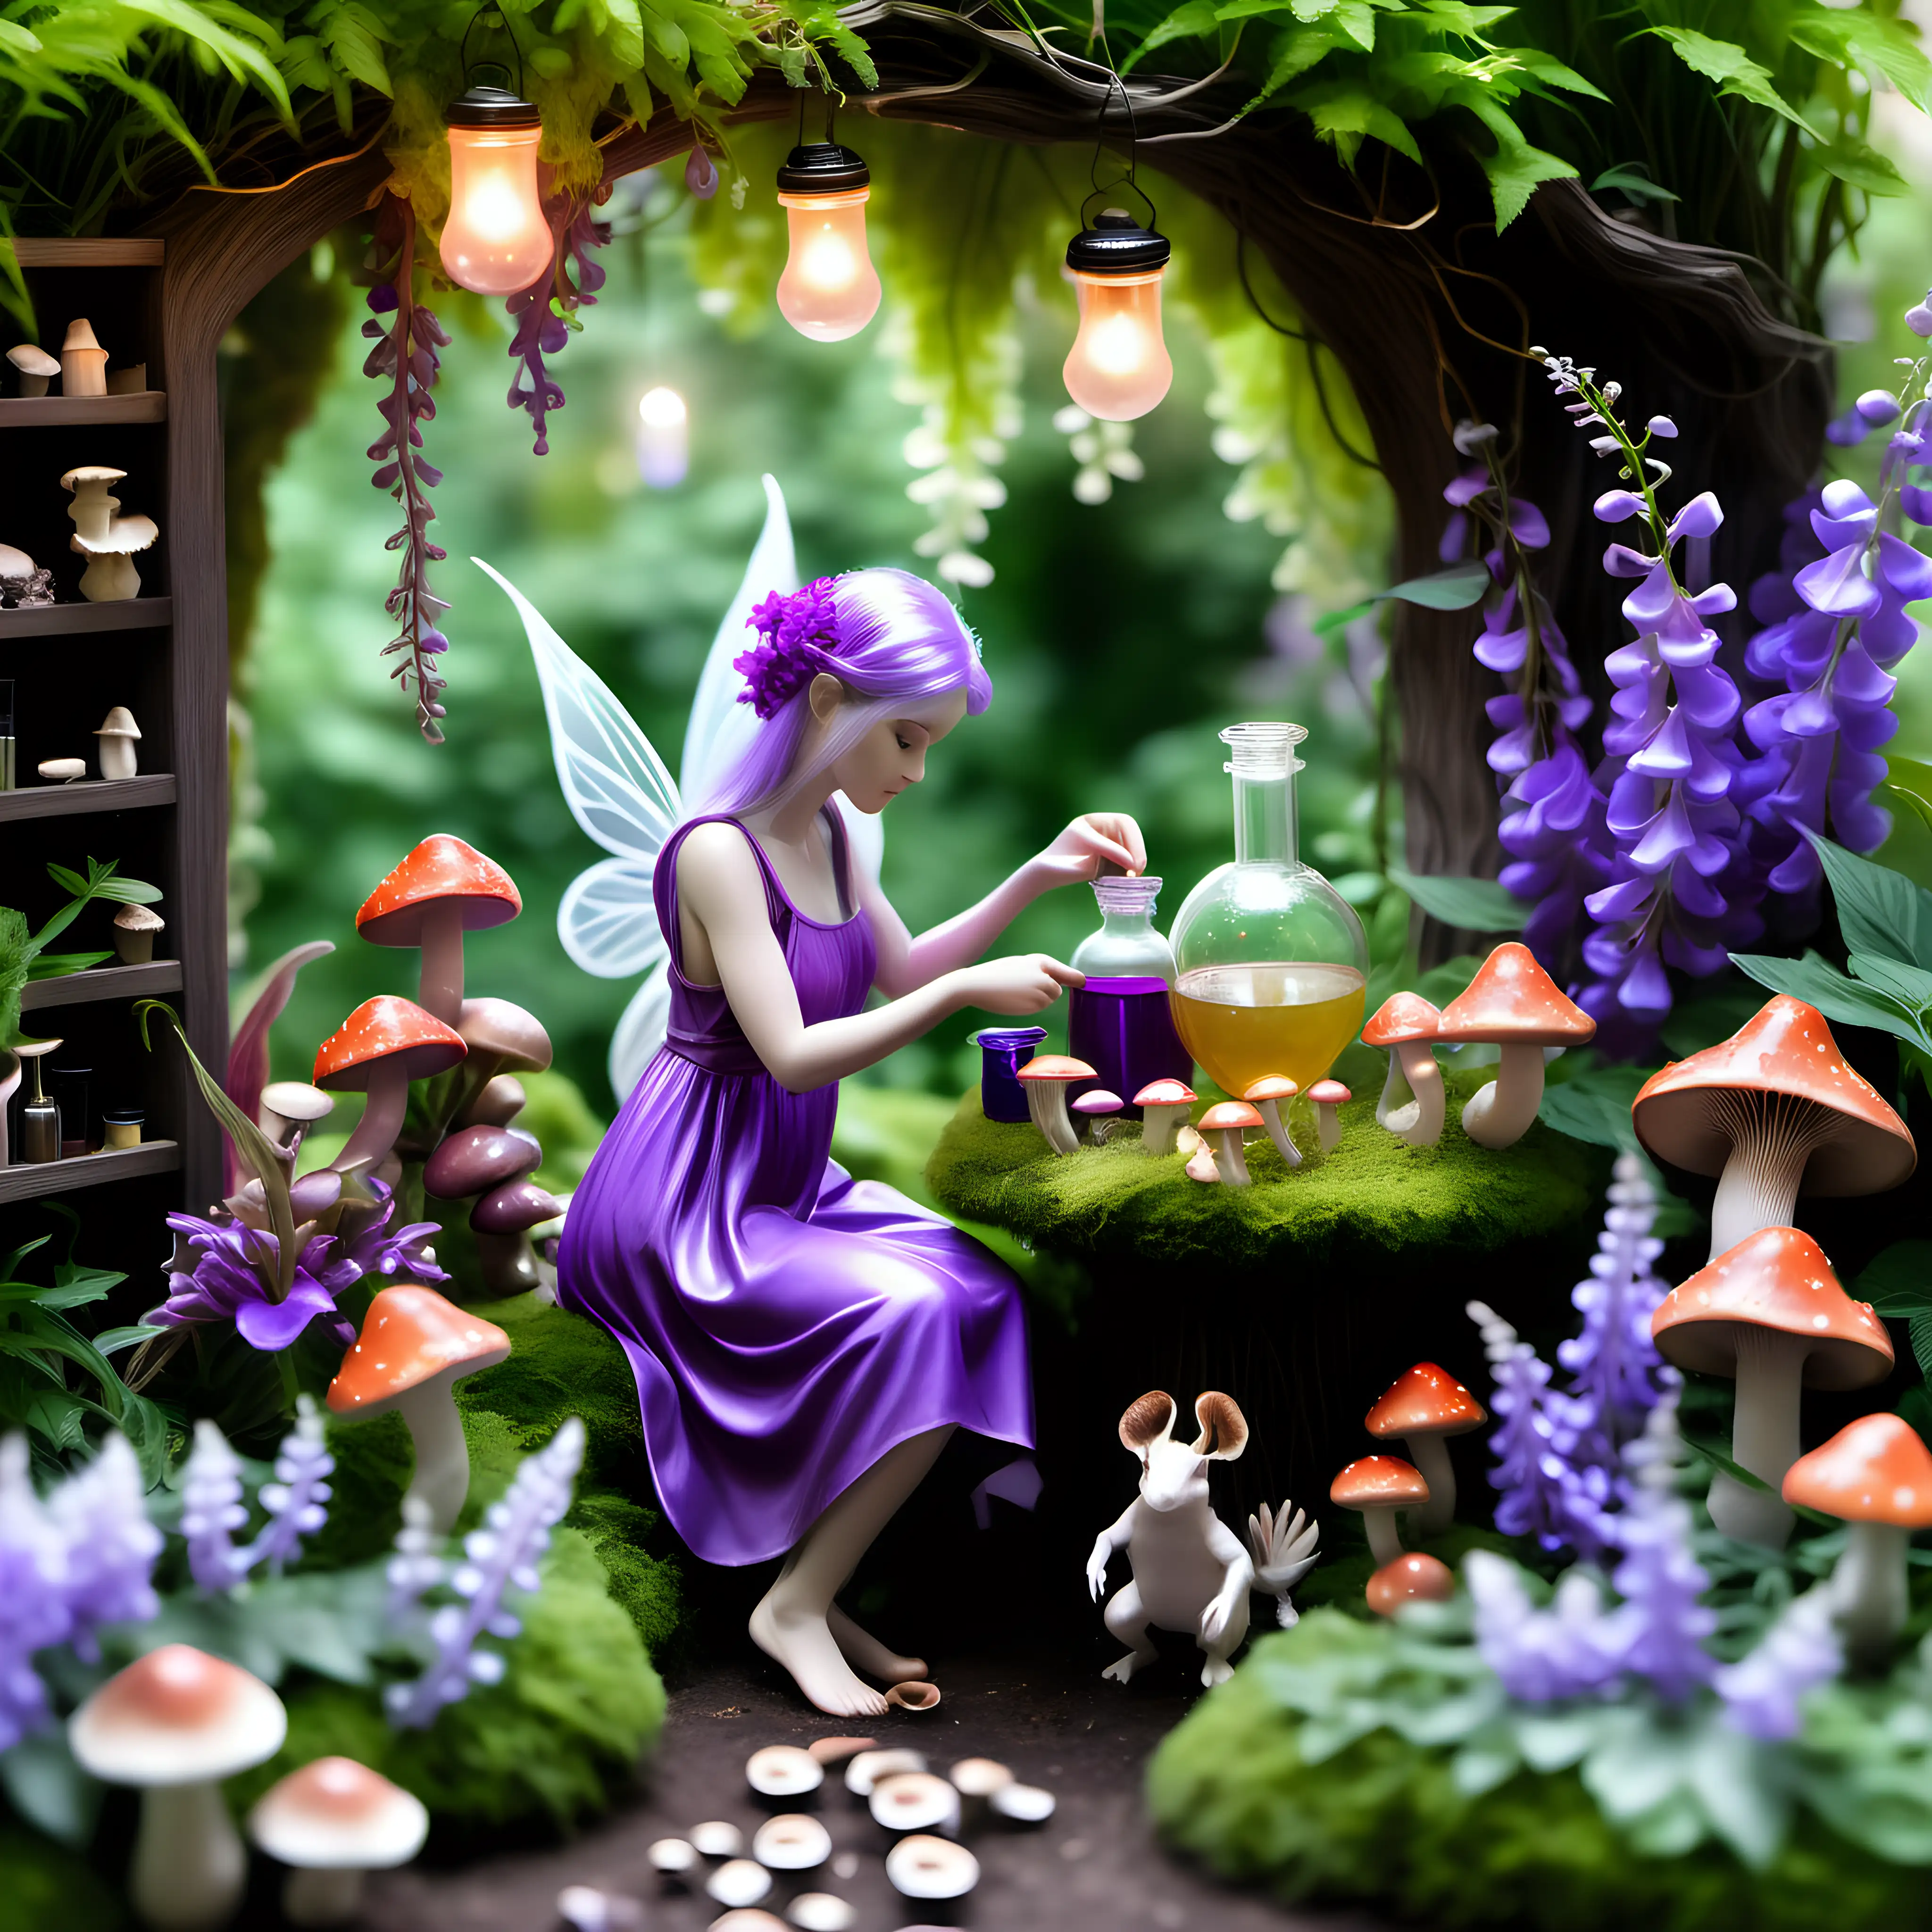 Fairy making potions in a lush garden with snap dragons and wisteria flowers and different mushrooms